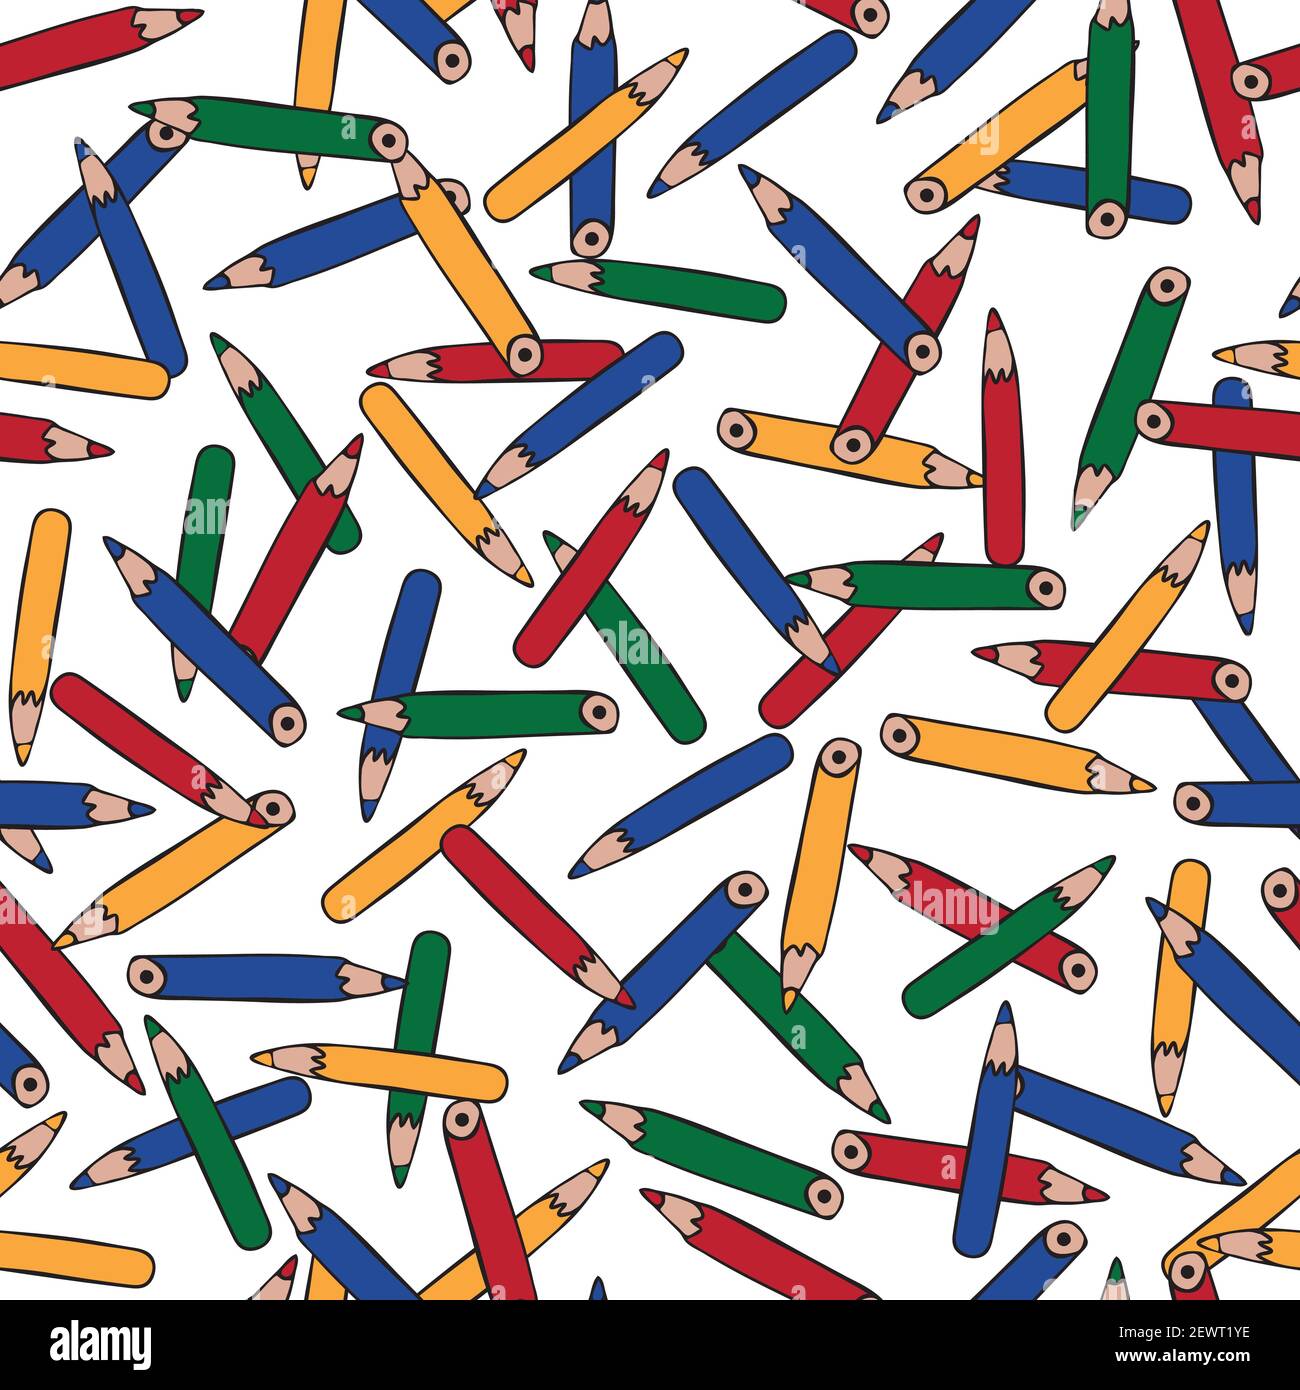 Seamless vector pattern with coloured pencils on white background. Cute artistic wallpaper design. Fun kids textile fashion. Stock Vector